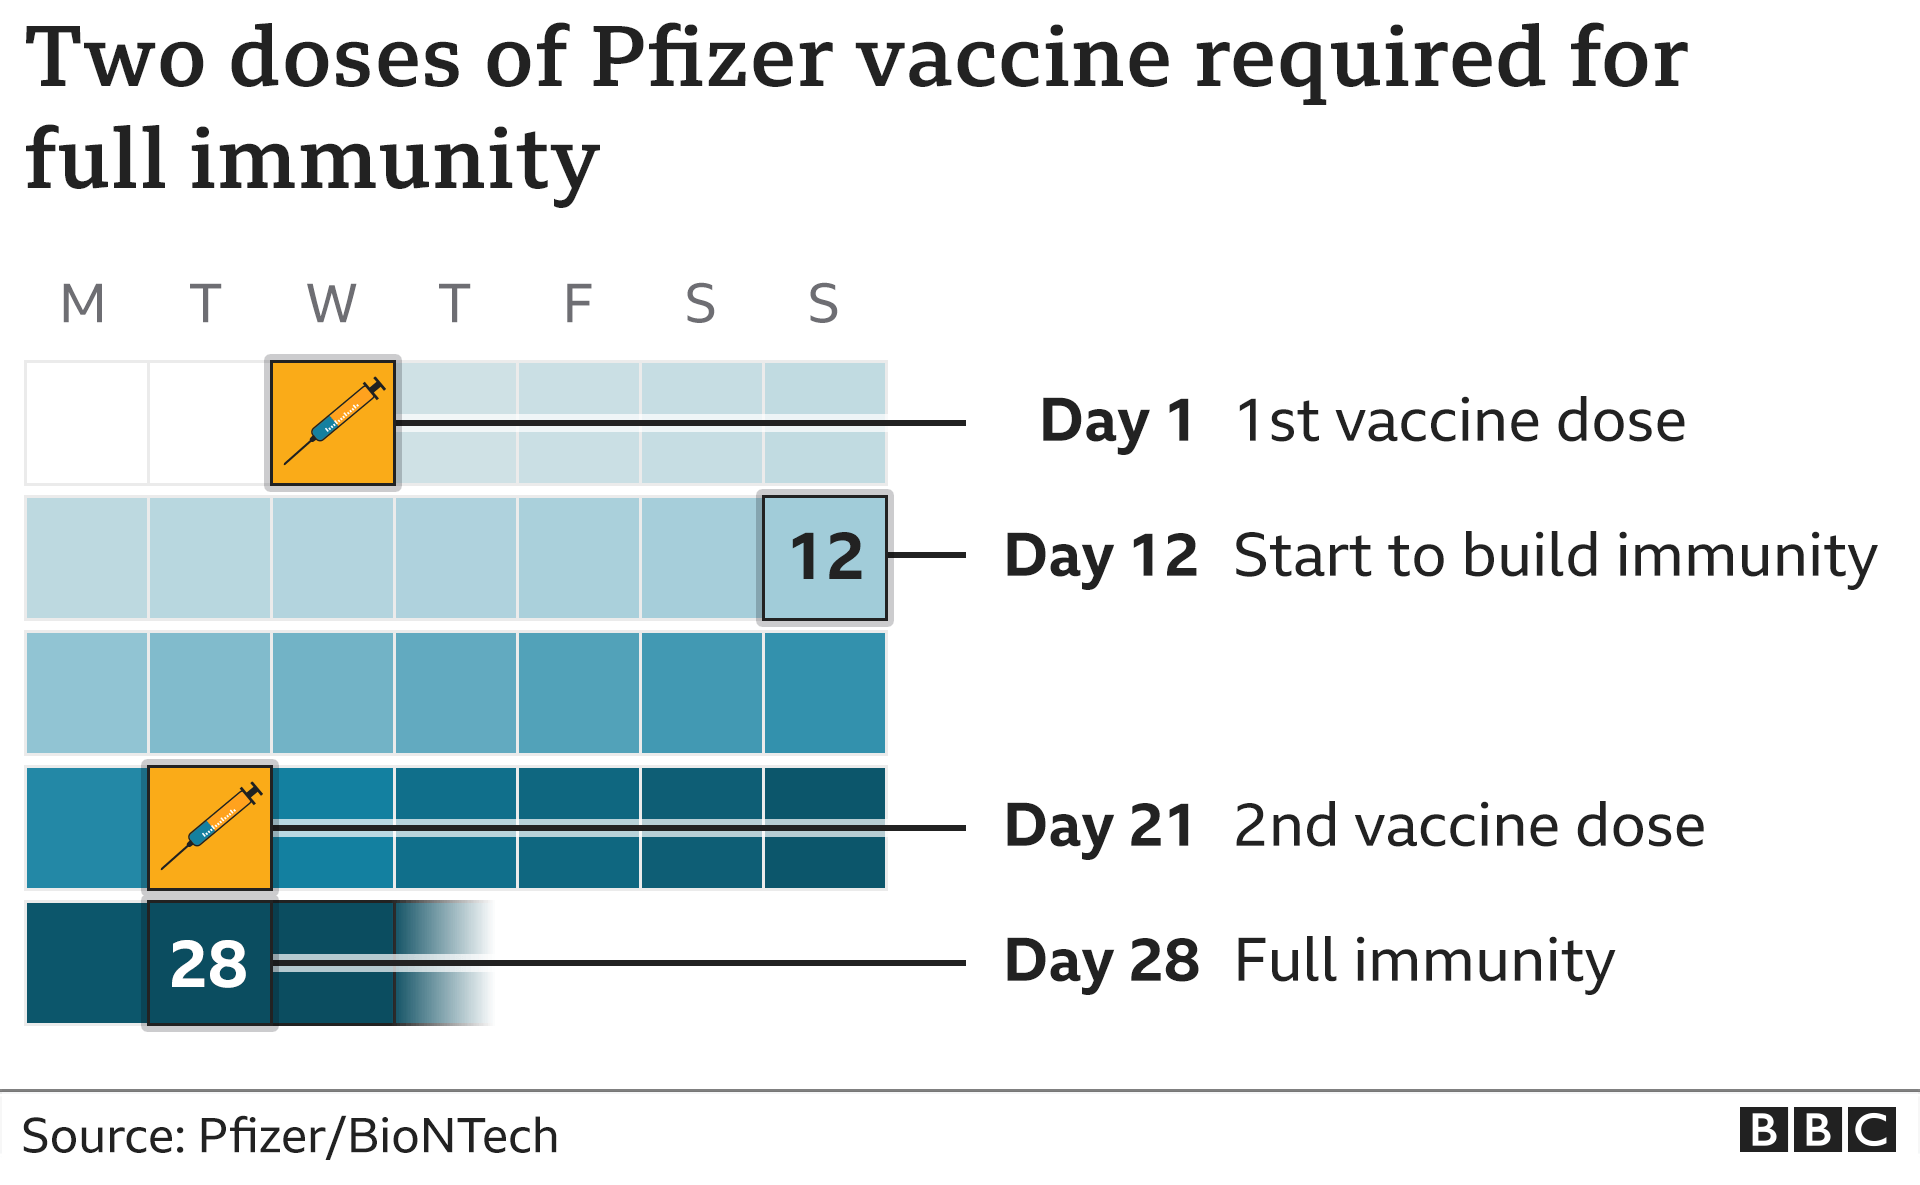 Pfizer vaccine second dose timing